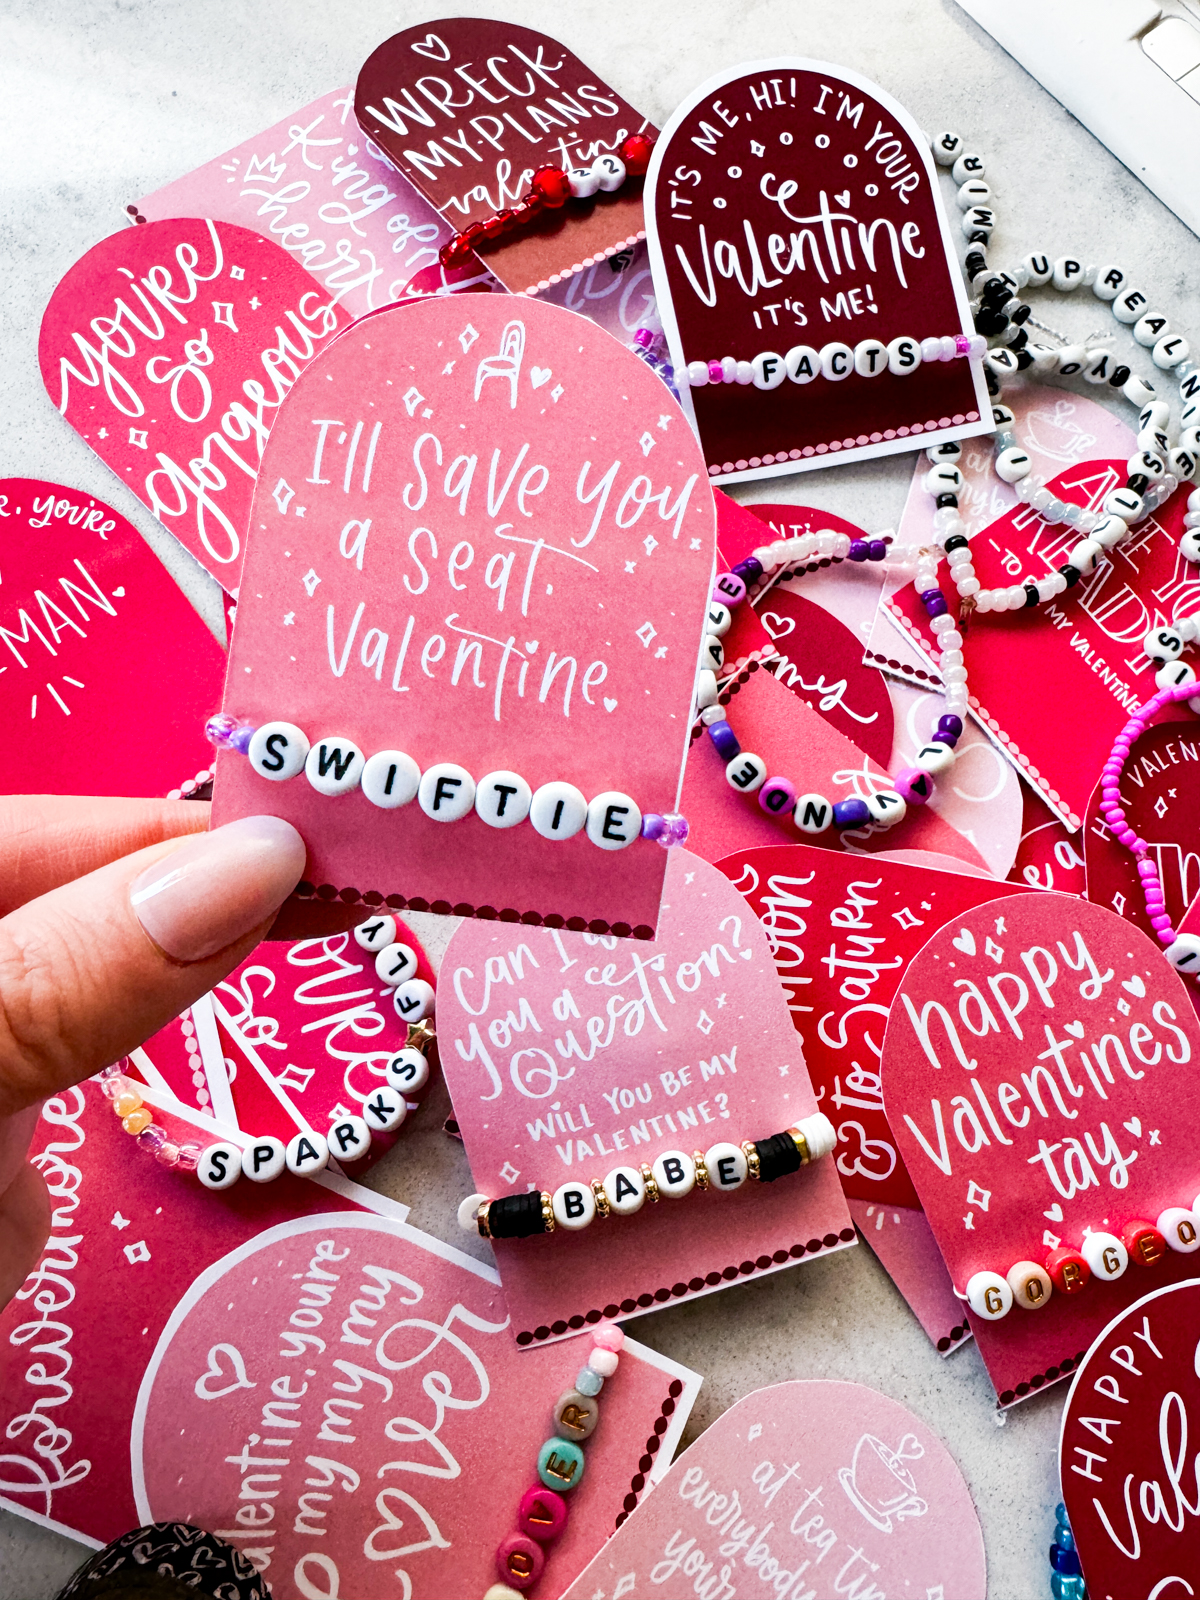 taylor swift themed valentines day cards printed and cut to size (pink and deep burgundy color with white hand lettered song lyrics) shown on marble countertop with beaded friendship bracelets. held valentine reads: i'll save you a seat, valentine with a 'swiftie' bracelet.